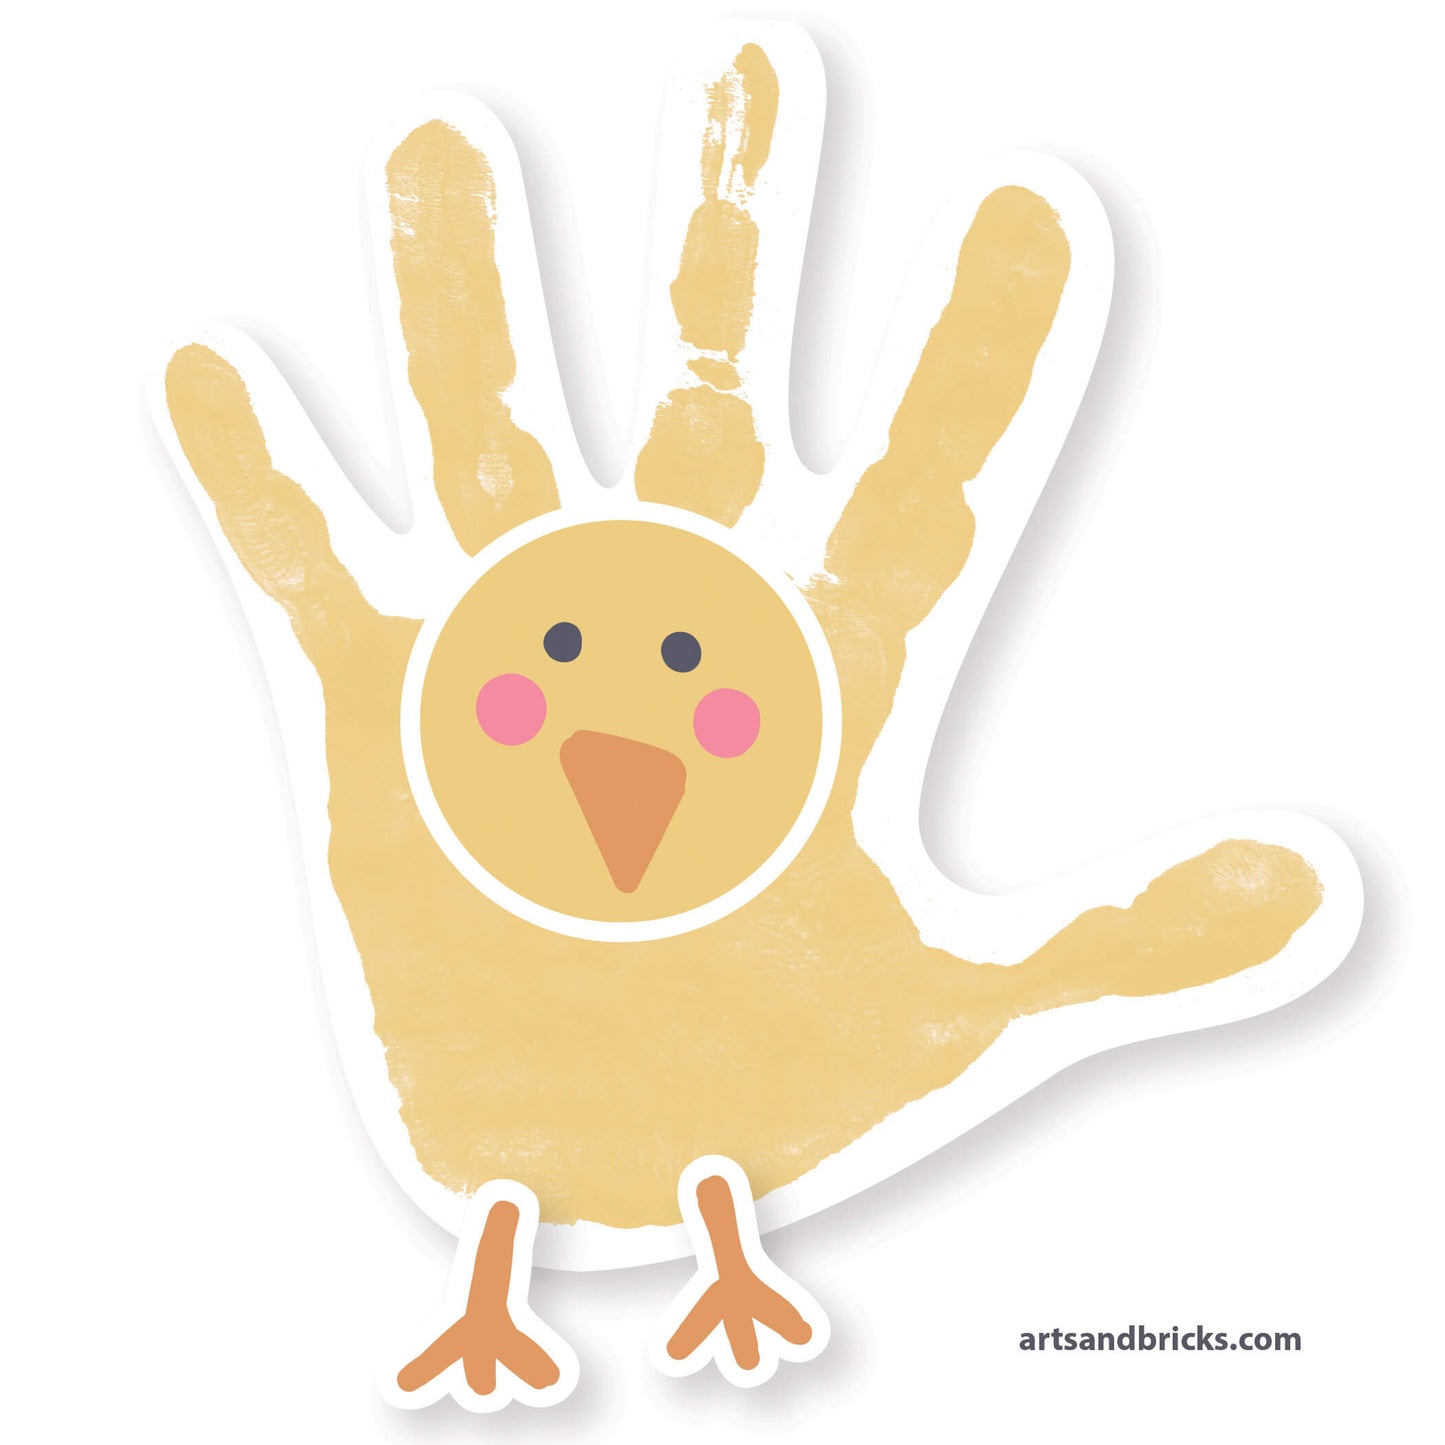 Image of chick handprint window cling